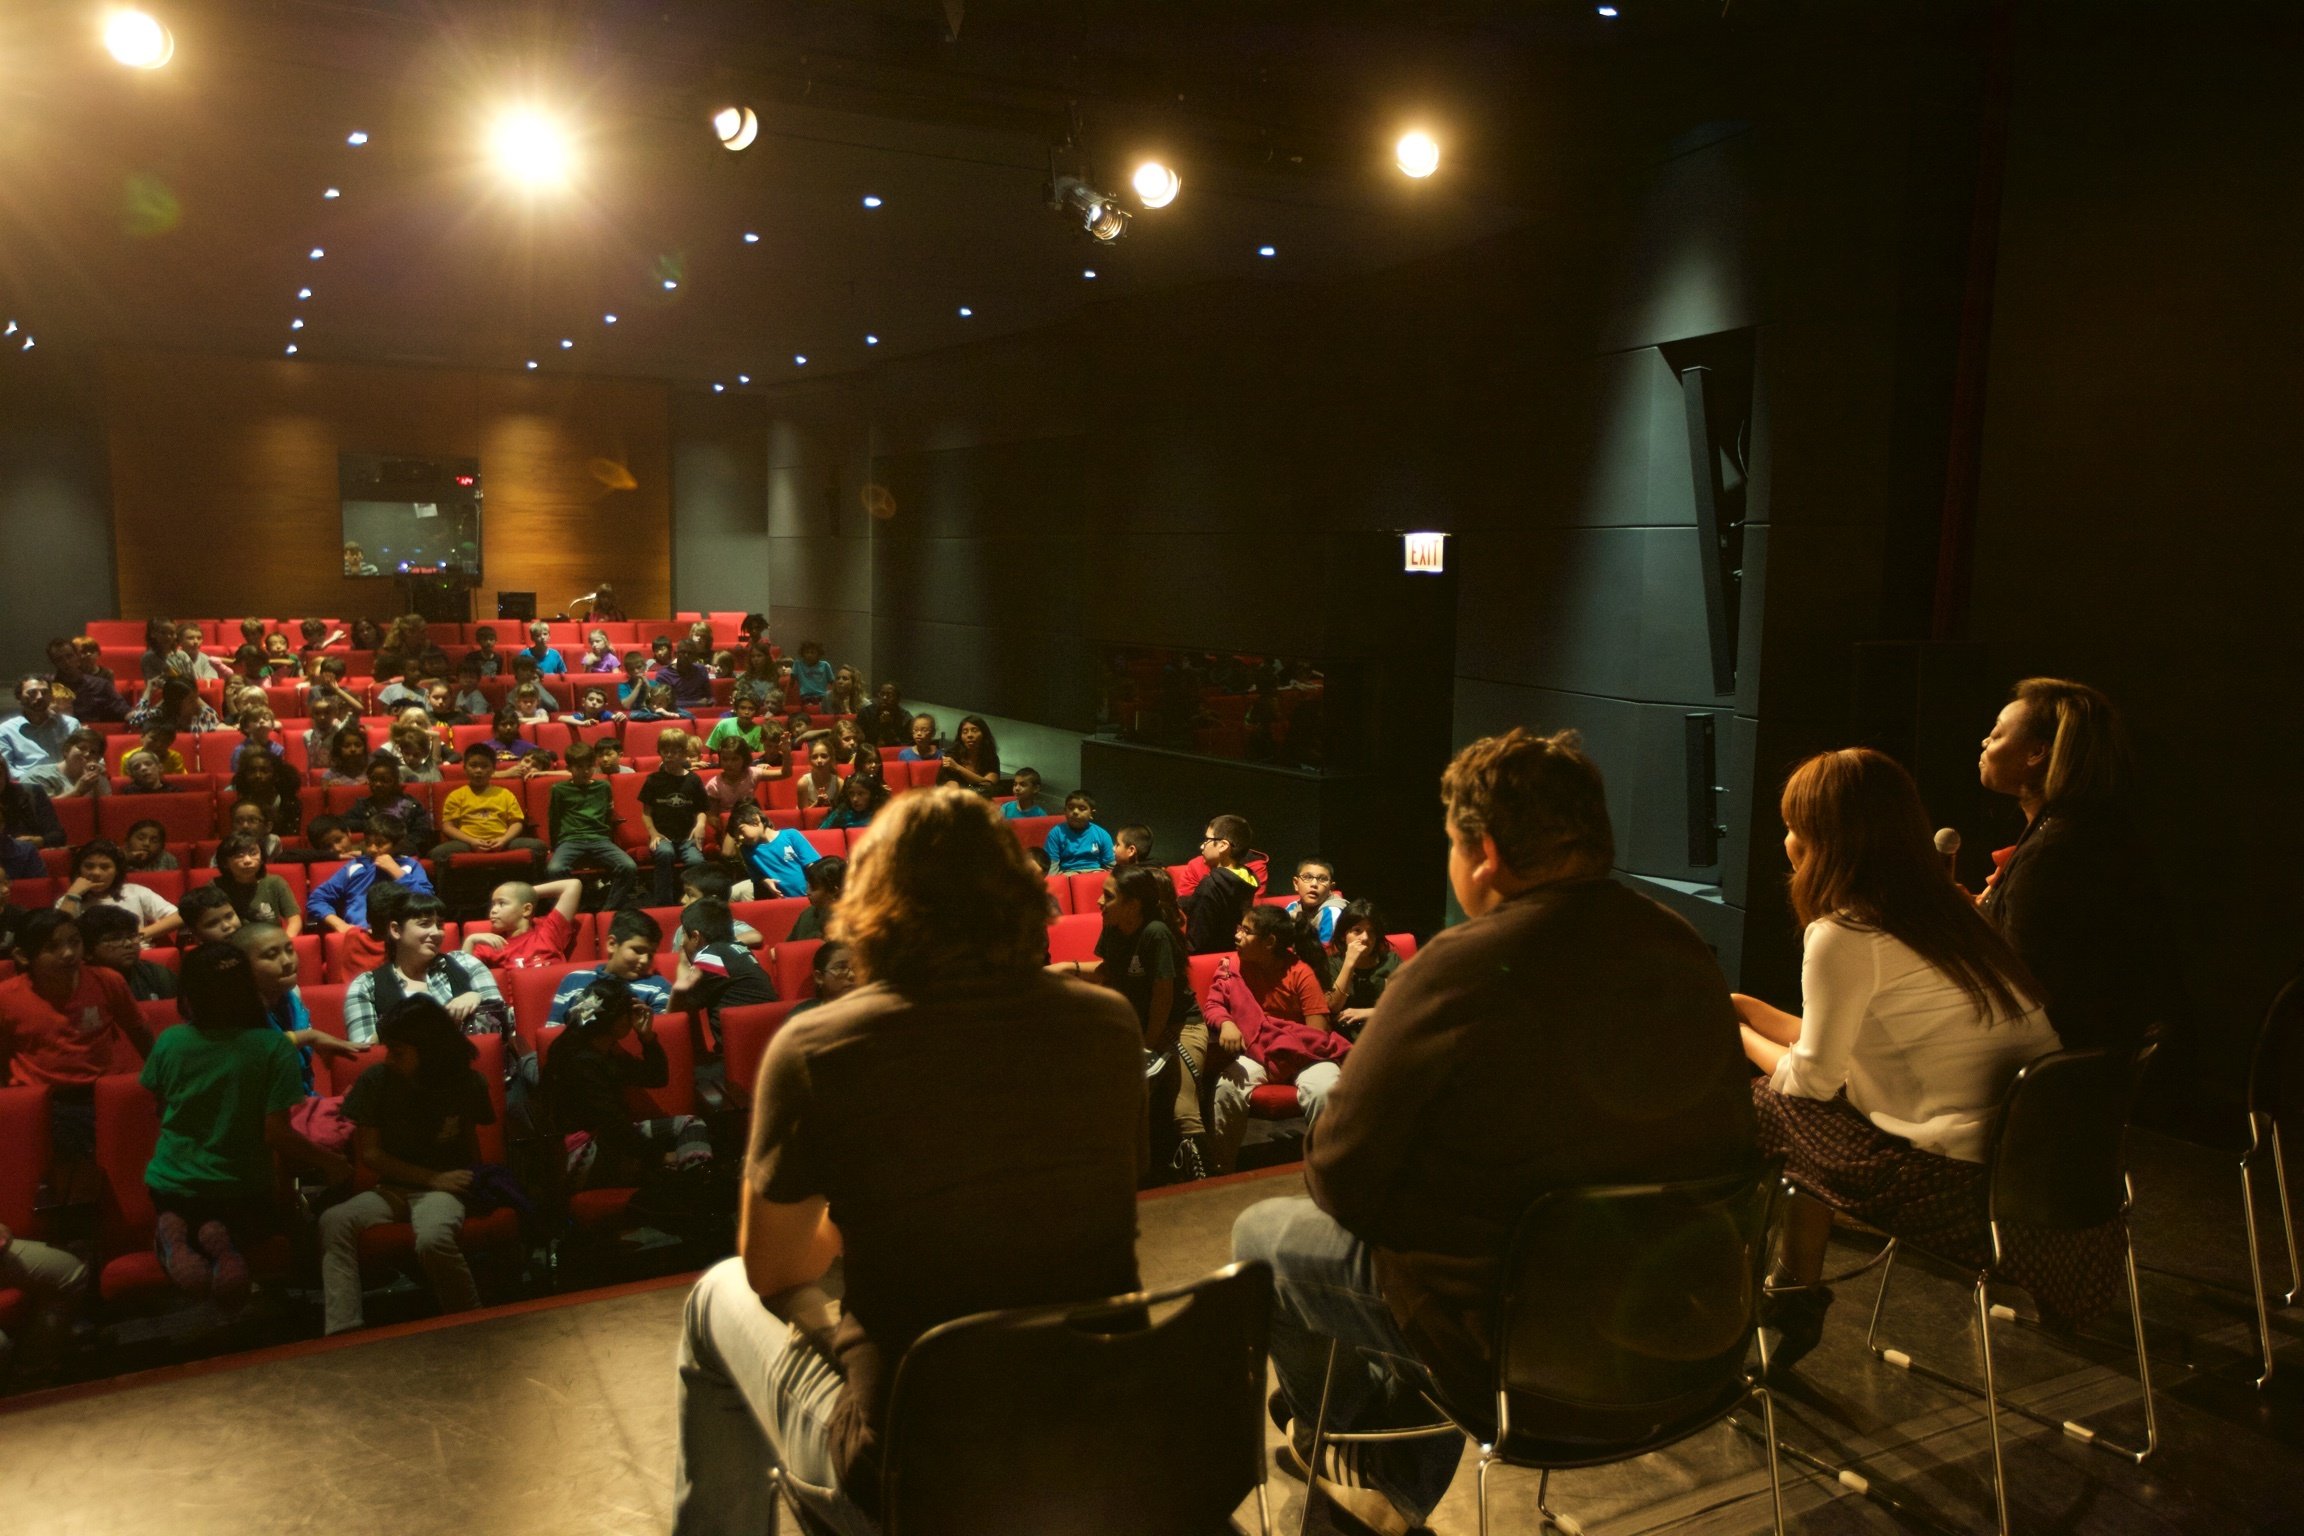 SecuenciaFi production company answers questions made by Children at the Chicago International Children's Film Festival, 2014, after viewing The Drawing of Language.